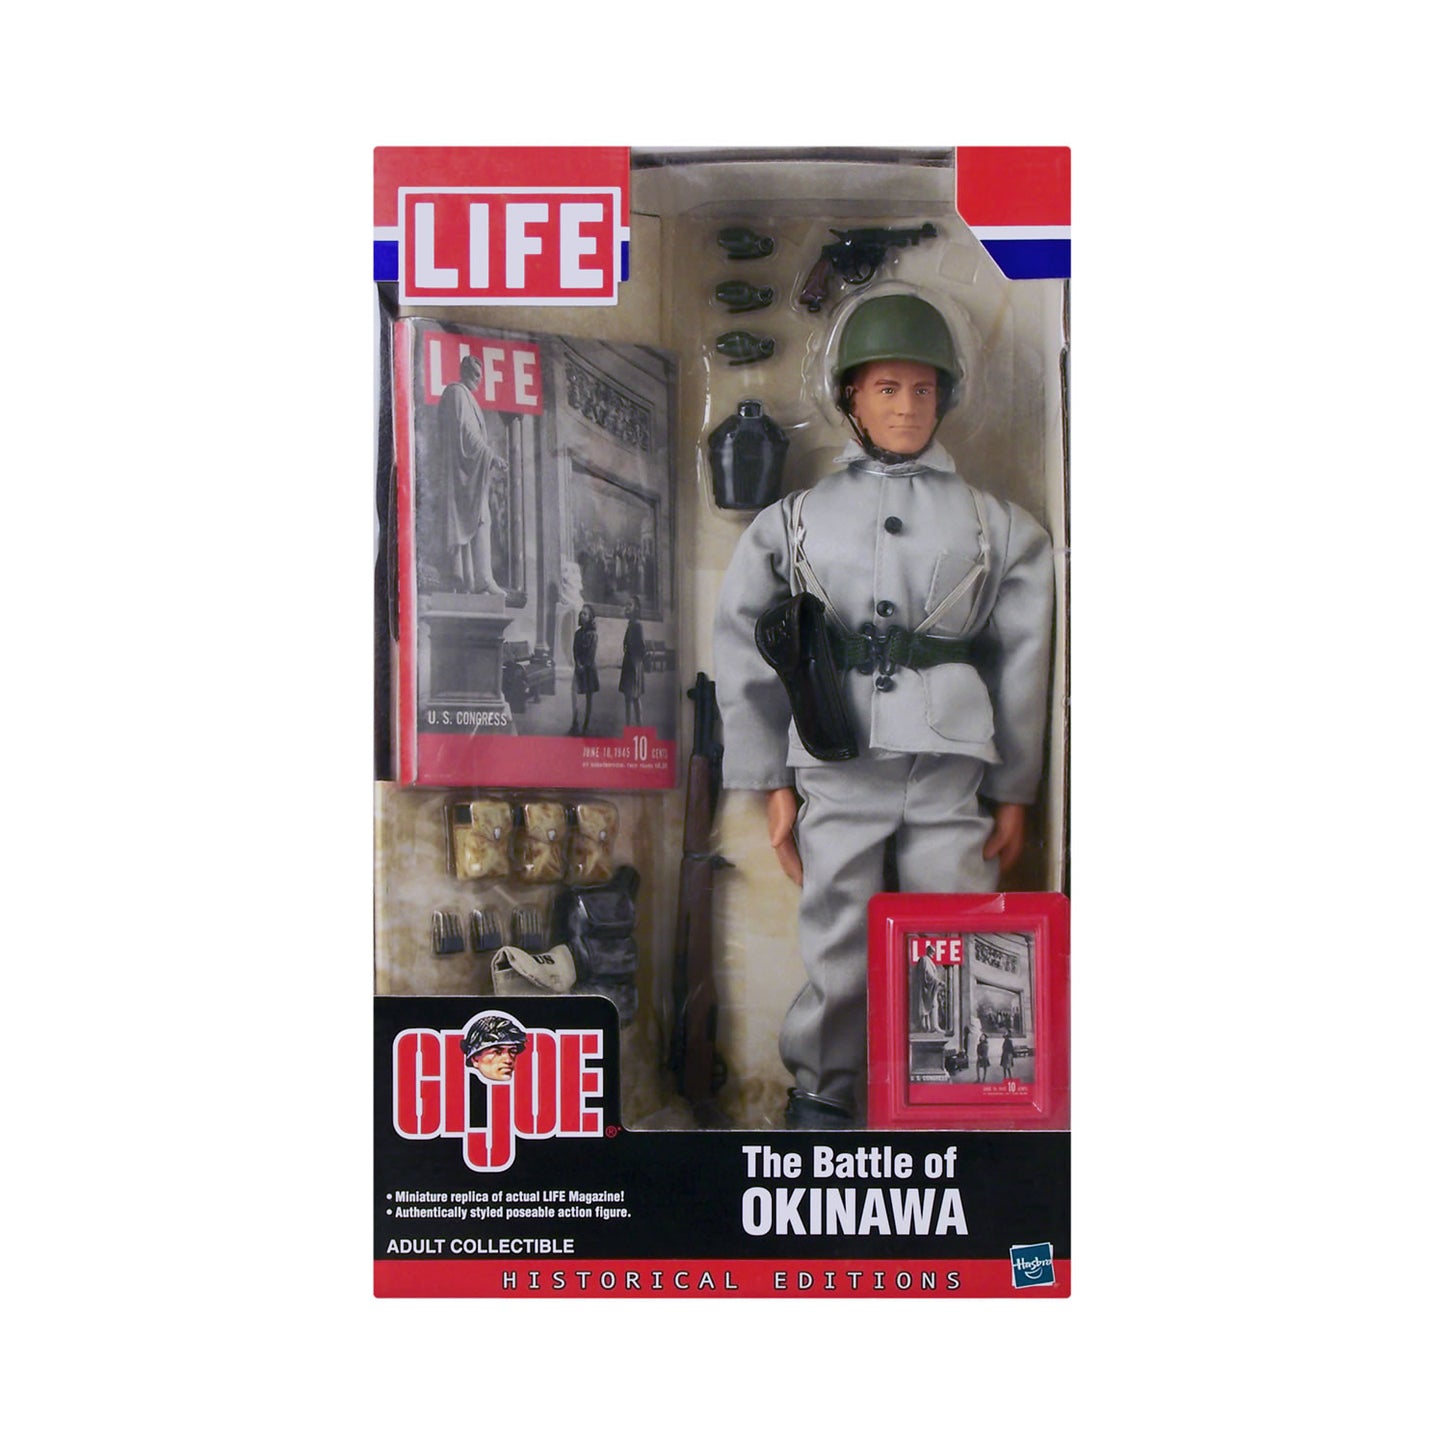 G.I. Joe Life Historical Editions The Battle of Okinawa 12-Inch Action Figure